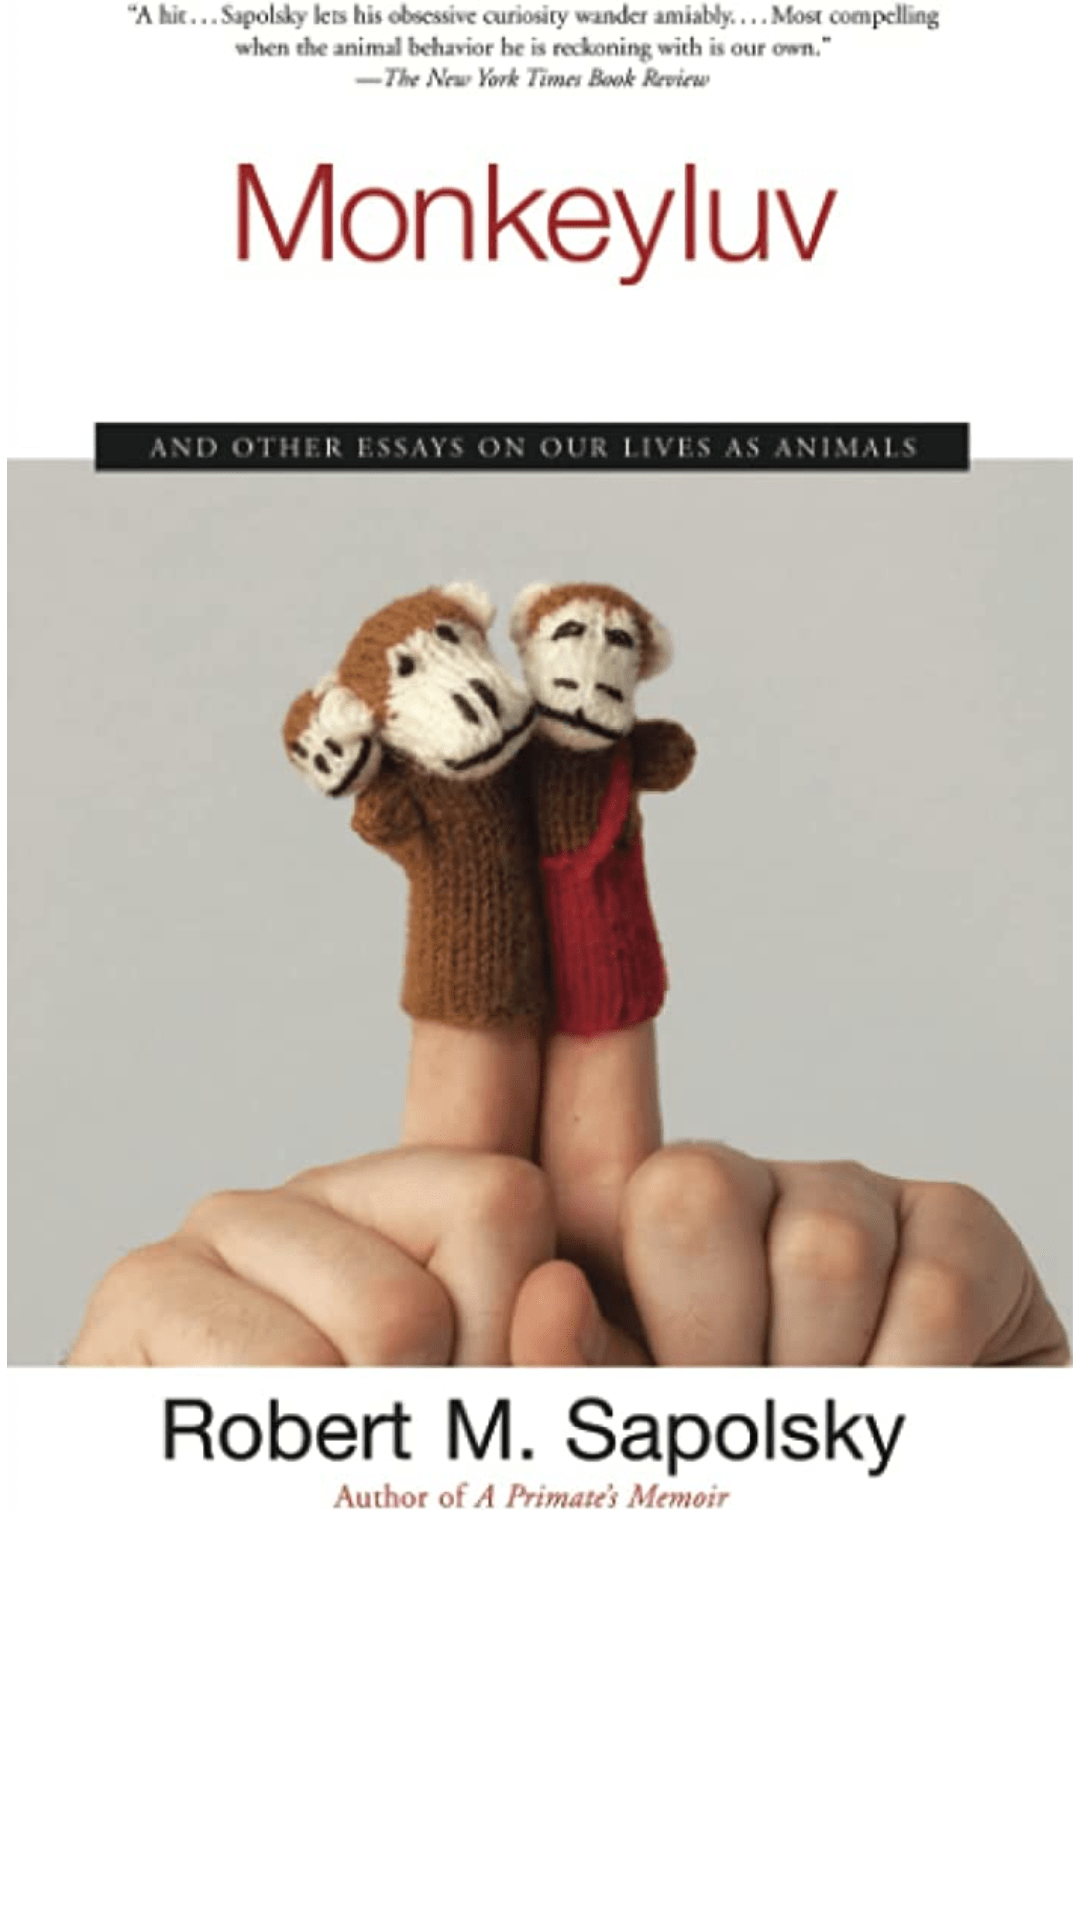 Monkeyluv: And Other Lessons in Our Lives as Animals